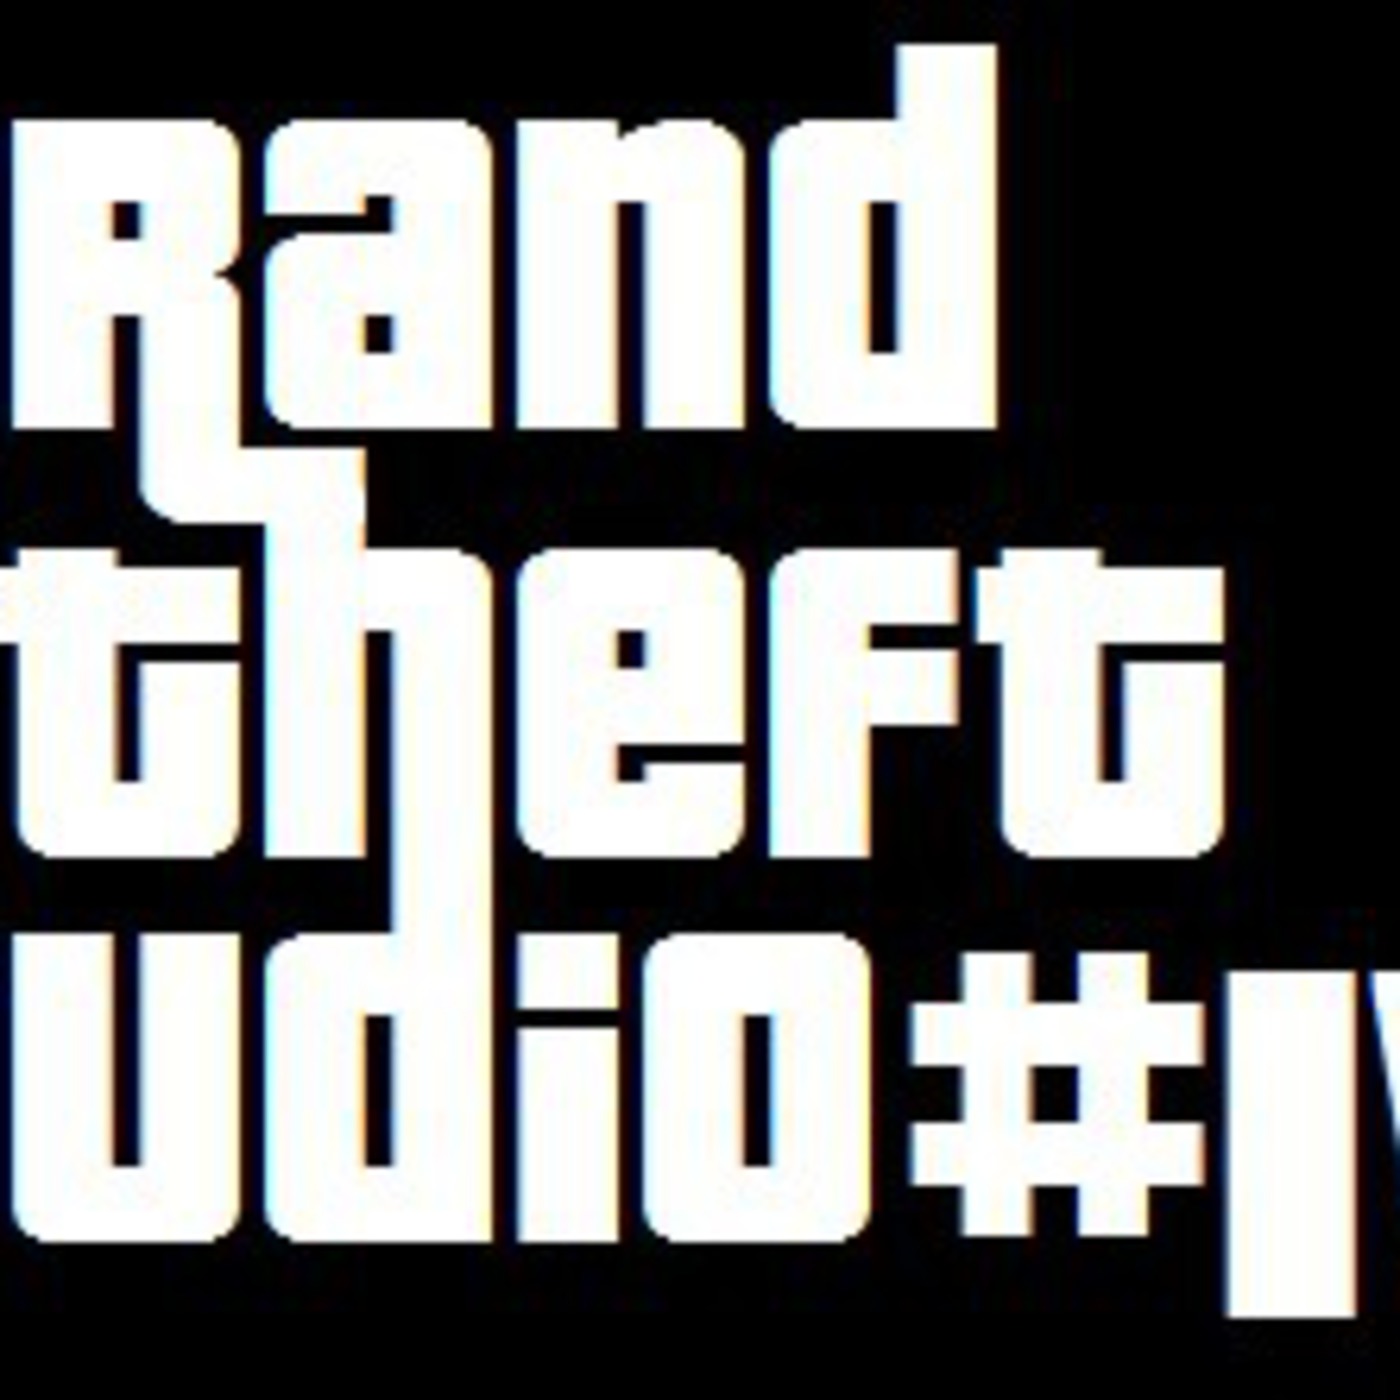 Grand Theft Audio #4 - Valve Mac/PS3 Rants, Fiscal Reports, and Keira Knightley! Oh My!